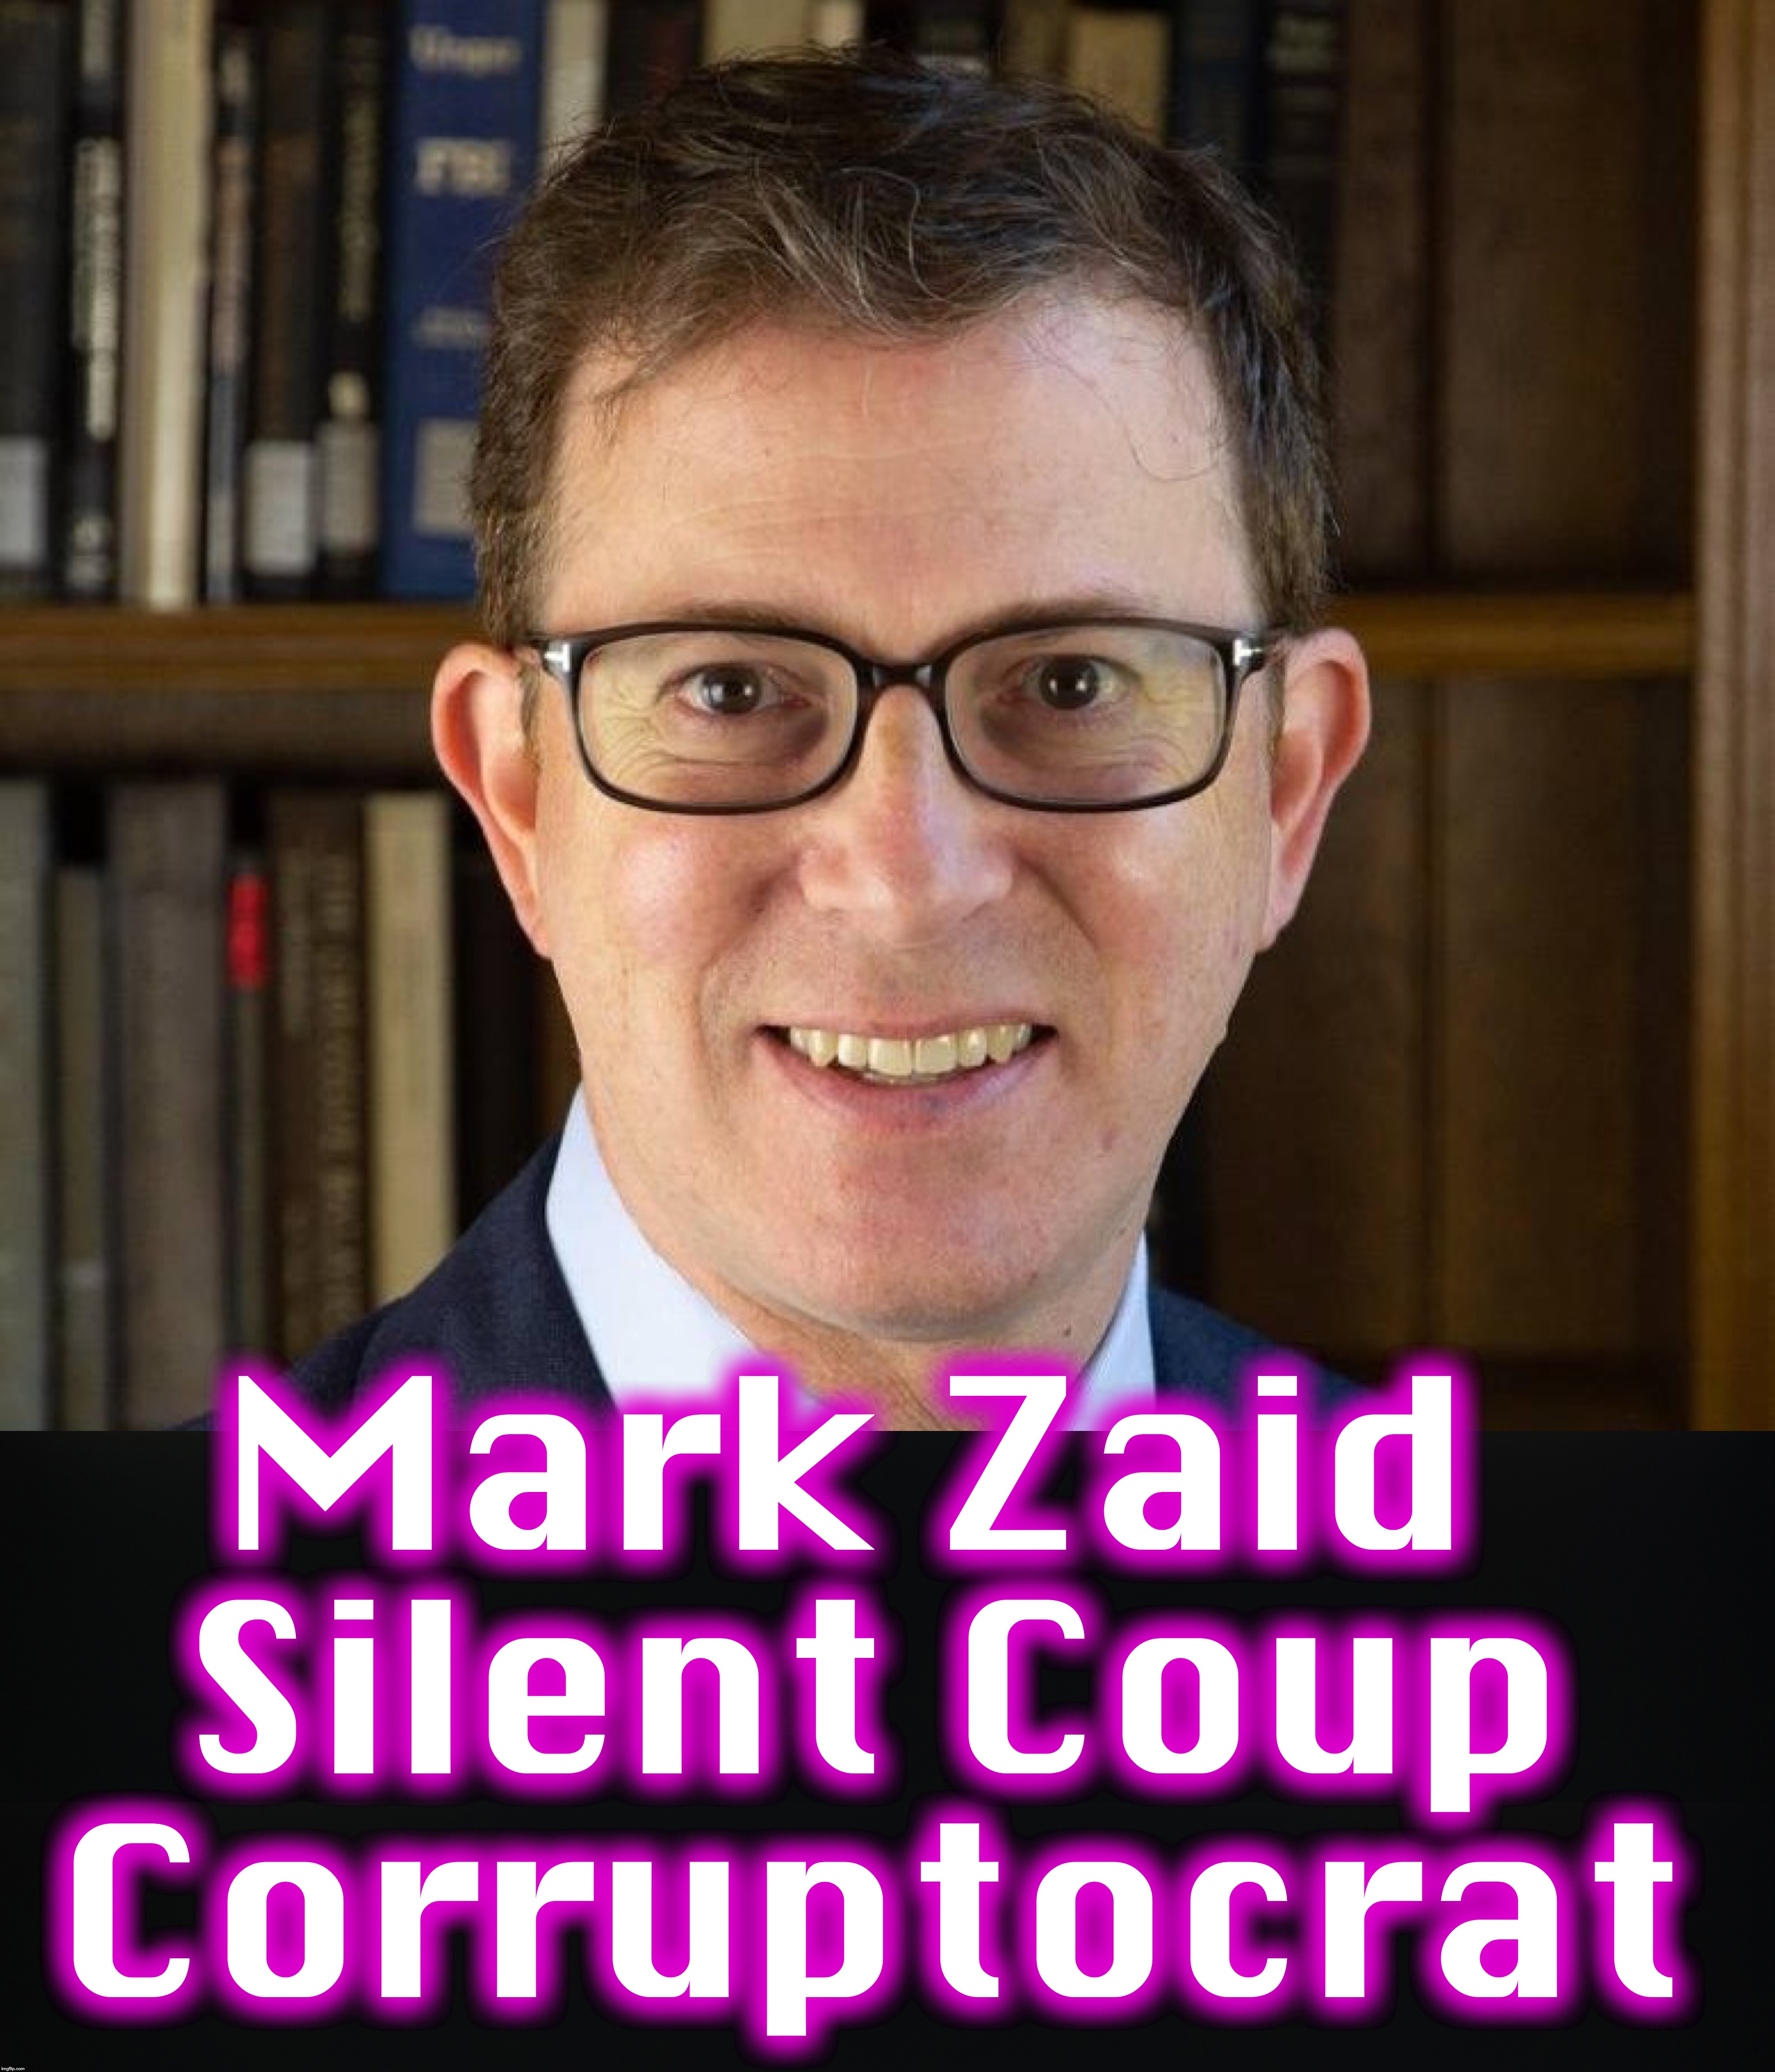 Mark Zaid 
Silent Coup Corruptocrat | image tagged in corruption,coup | made w/ Imgflip meme maker